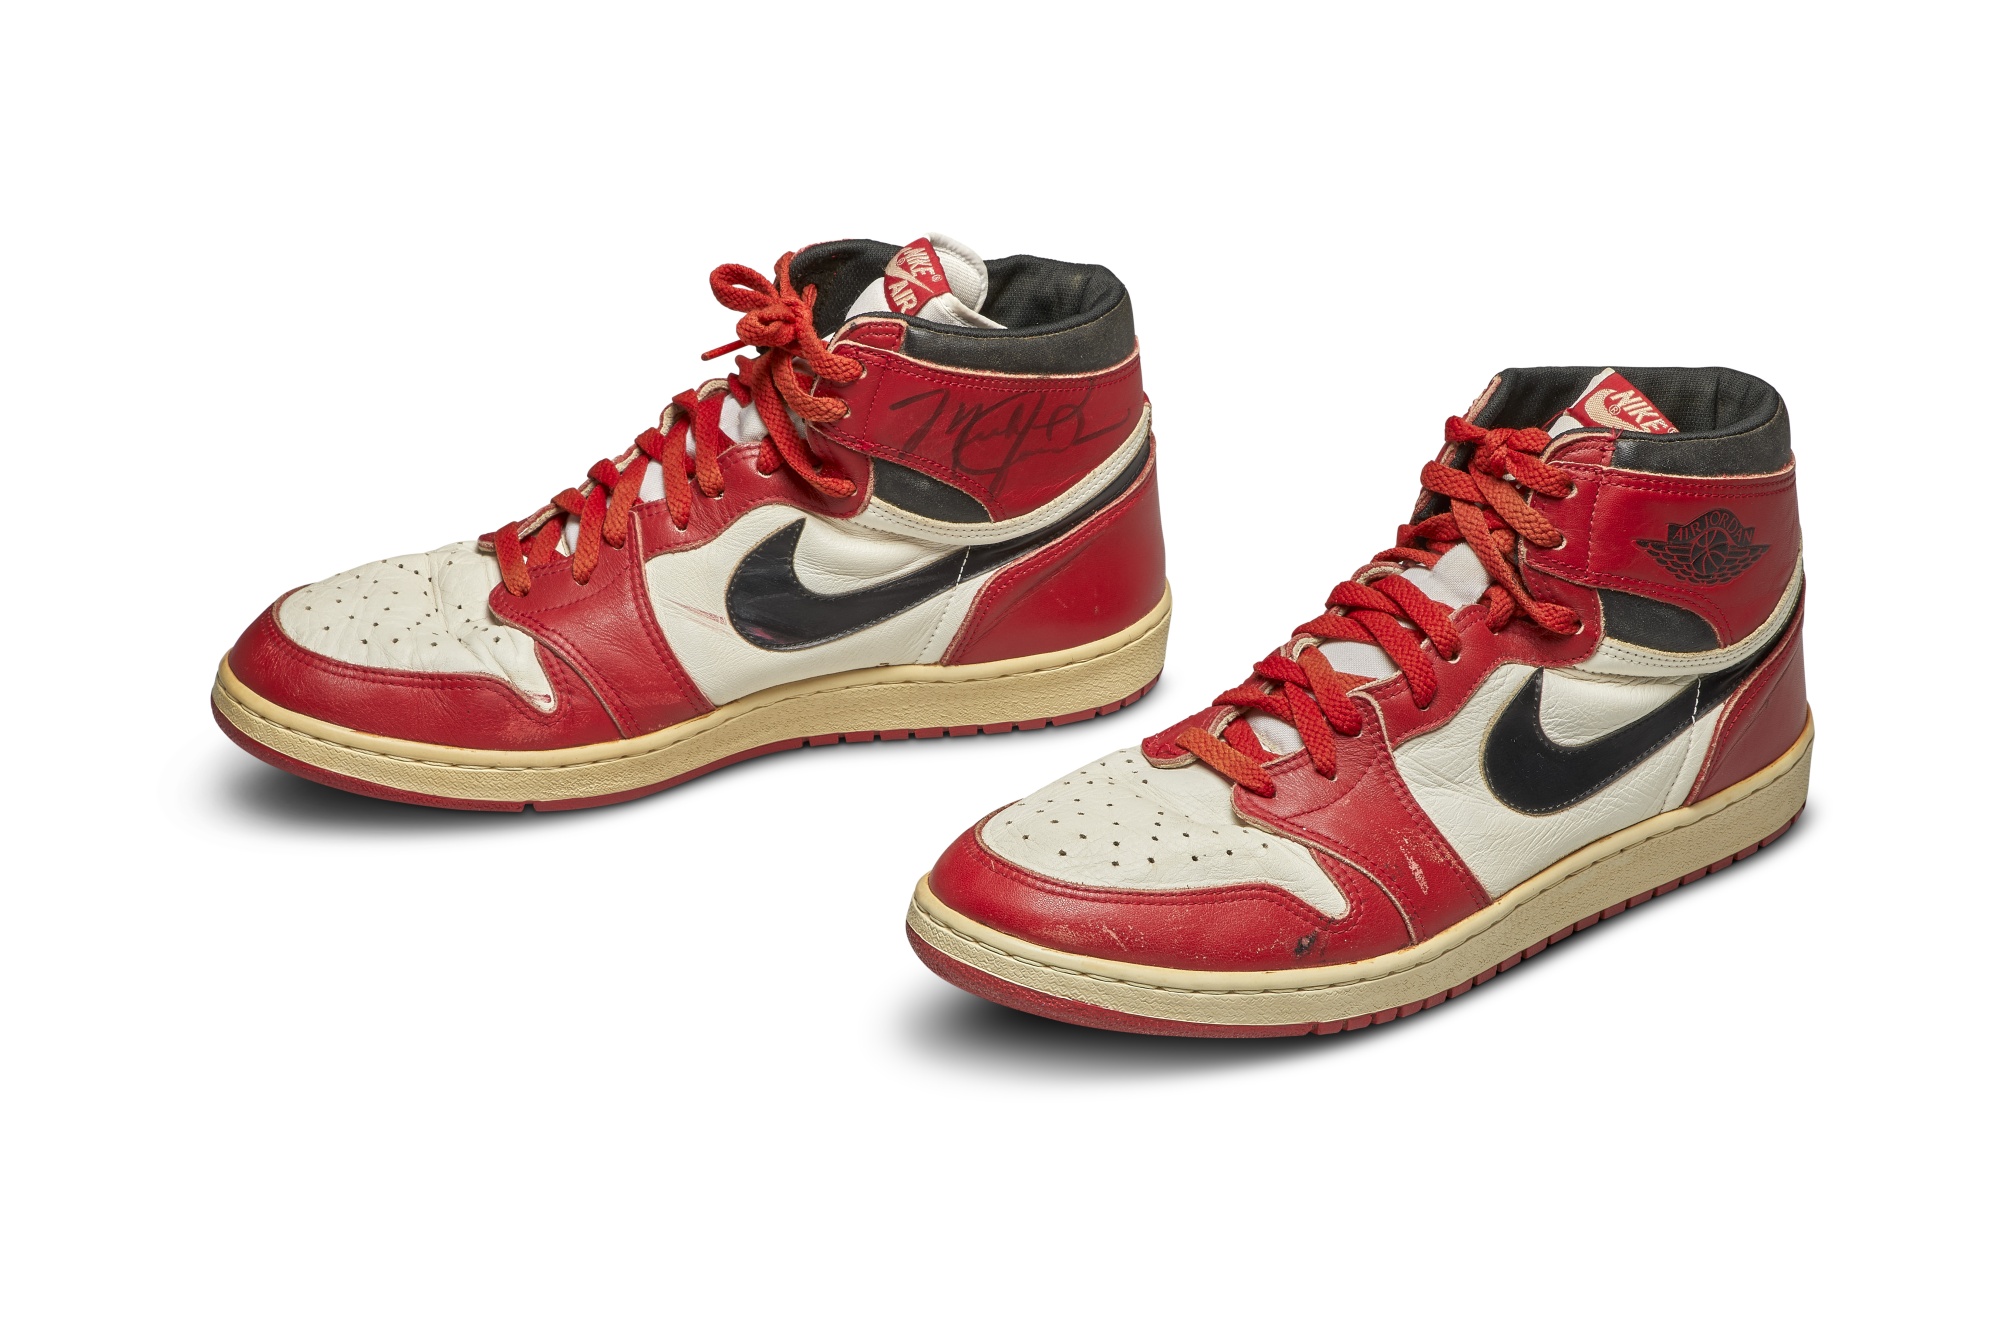 How Michael Jordan's Sneakers Shaped Basketball and Fashion